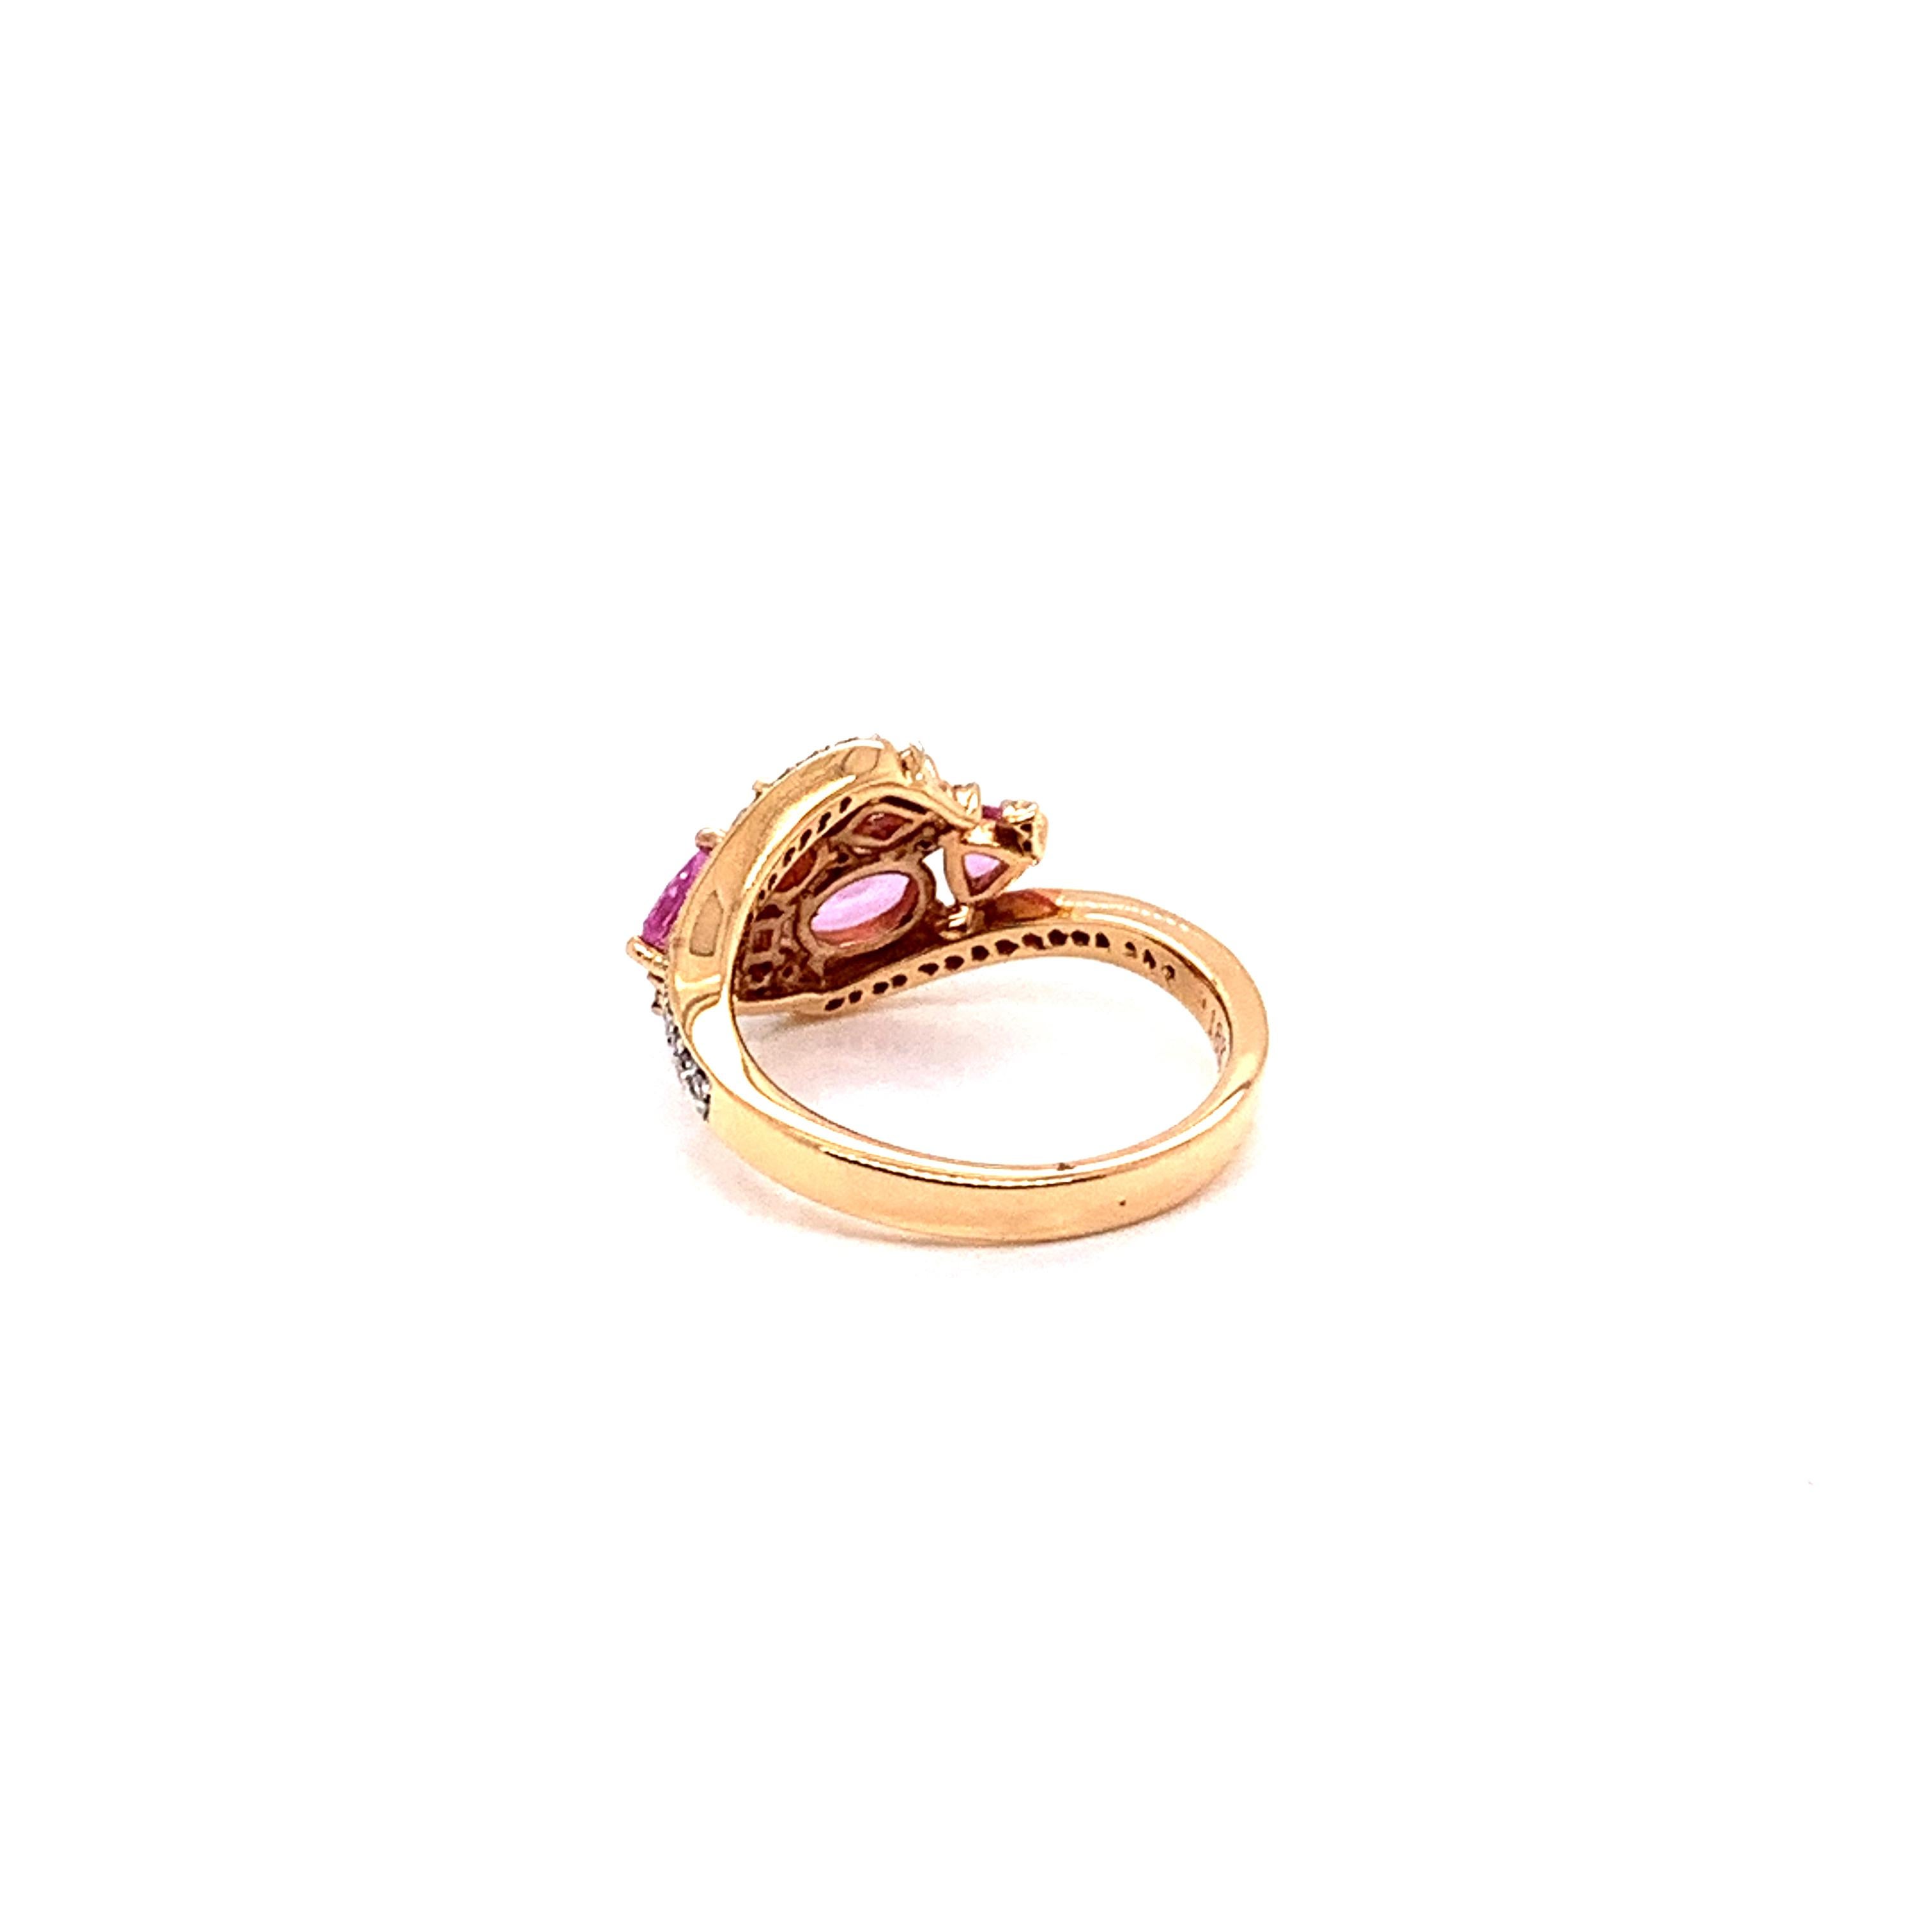 Women's 1.4 Carat Pink Sapphire Ring in 18 Karat Rose Gold with Diamond For Sale